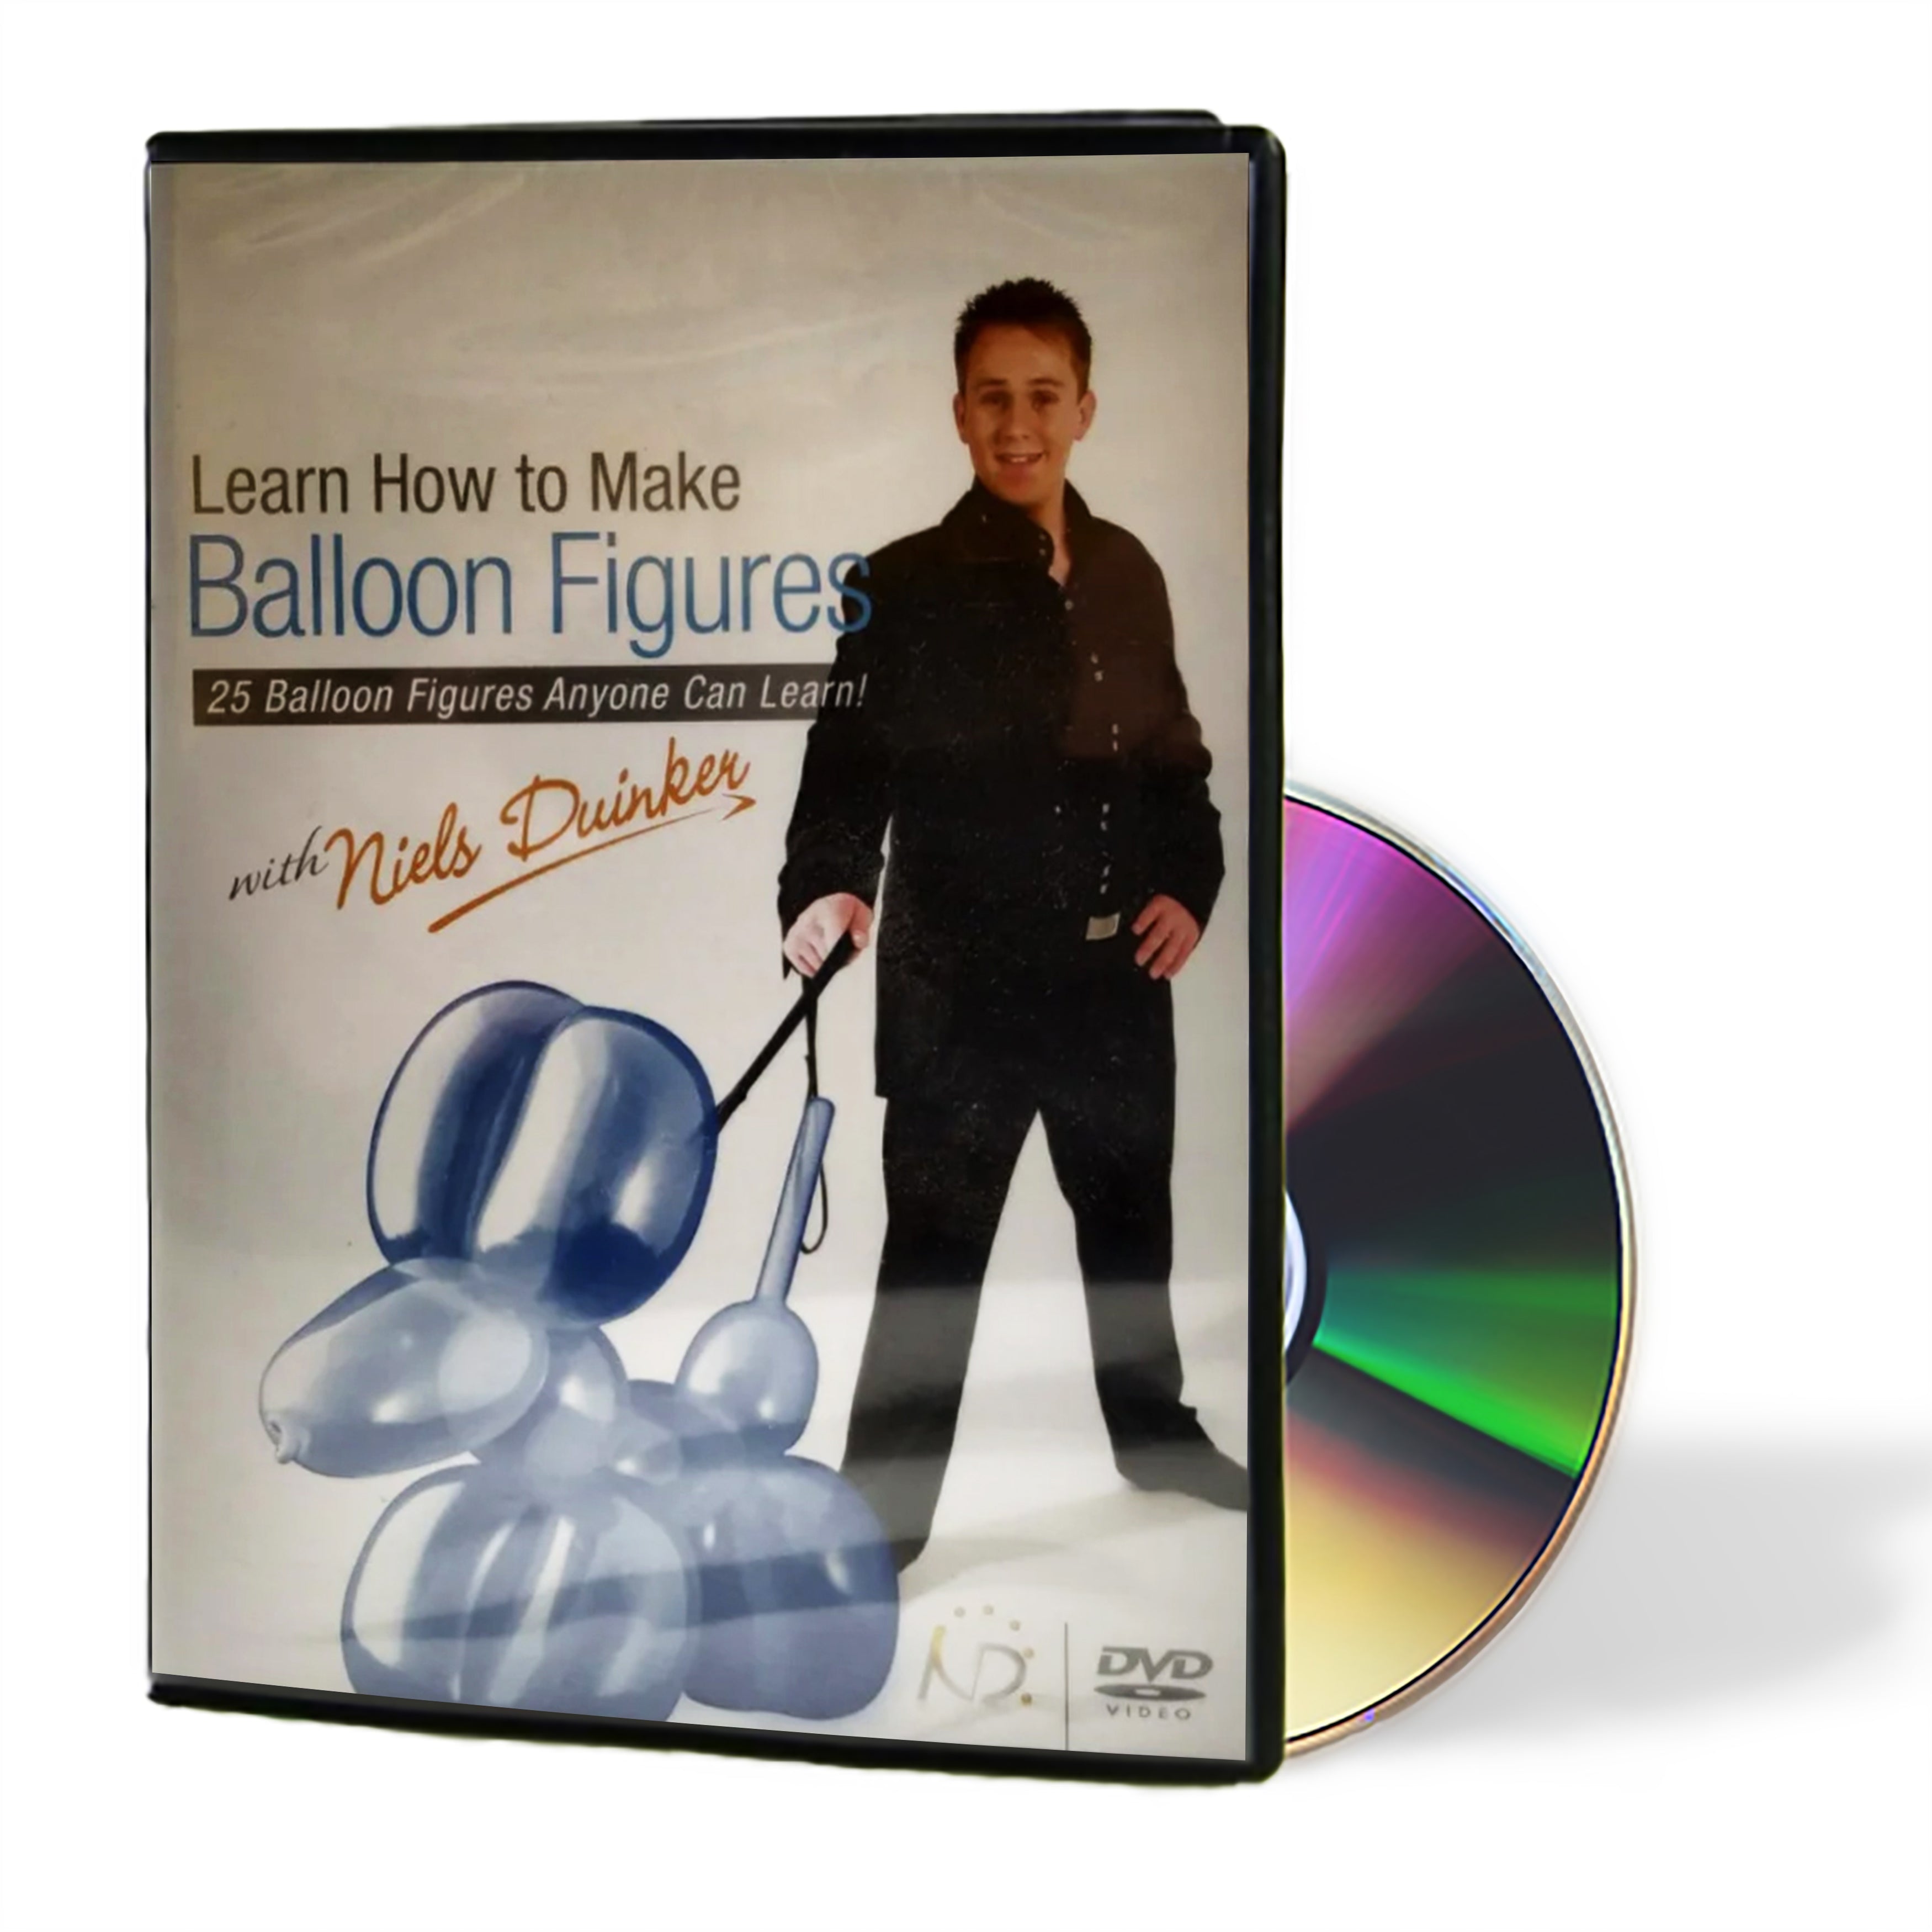 Learn how to make Balloon figures with Niels Duinker DVD